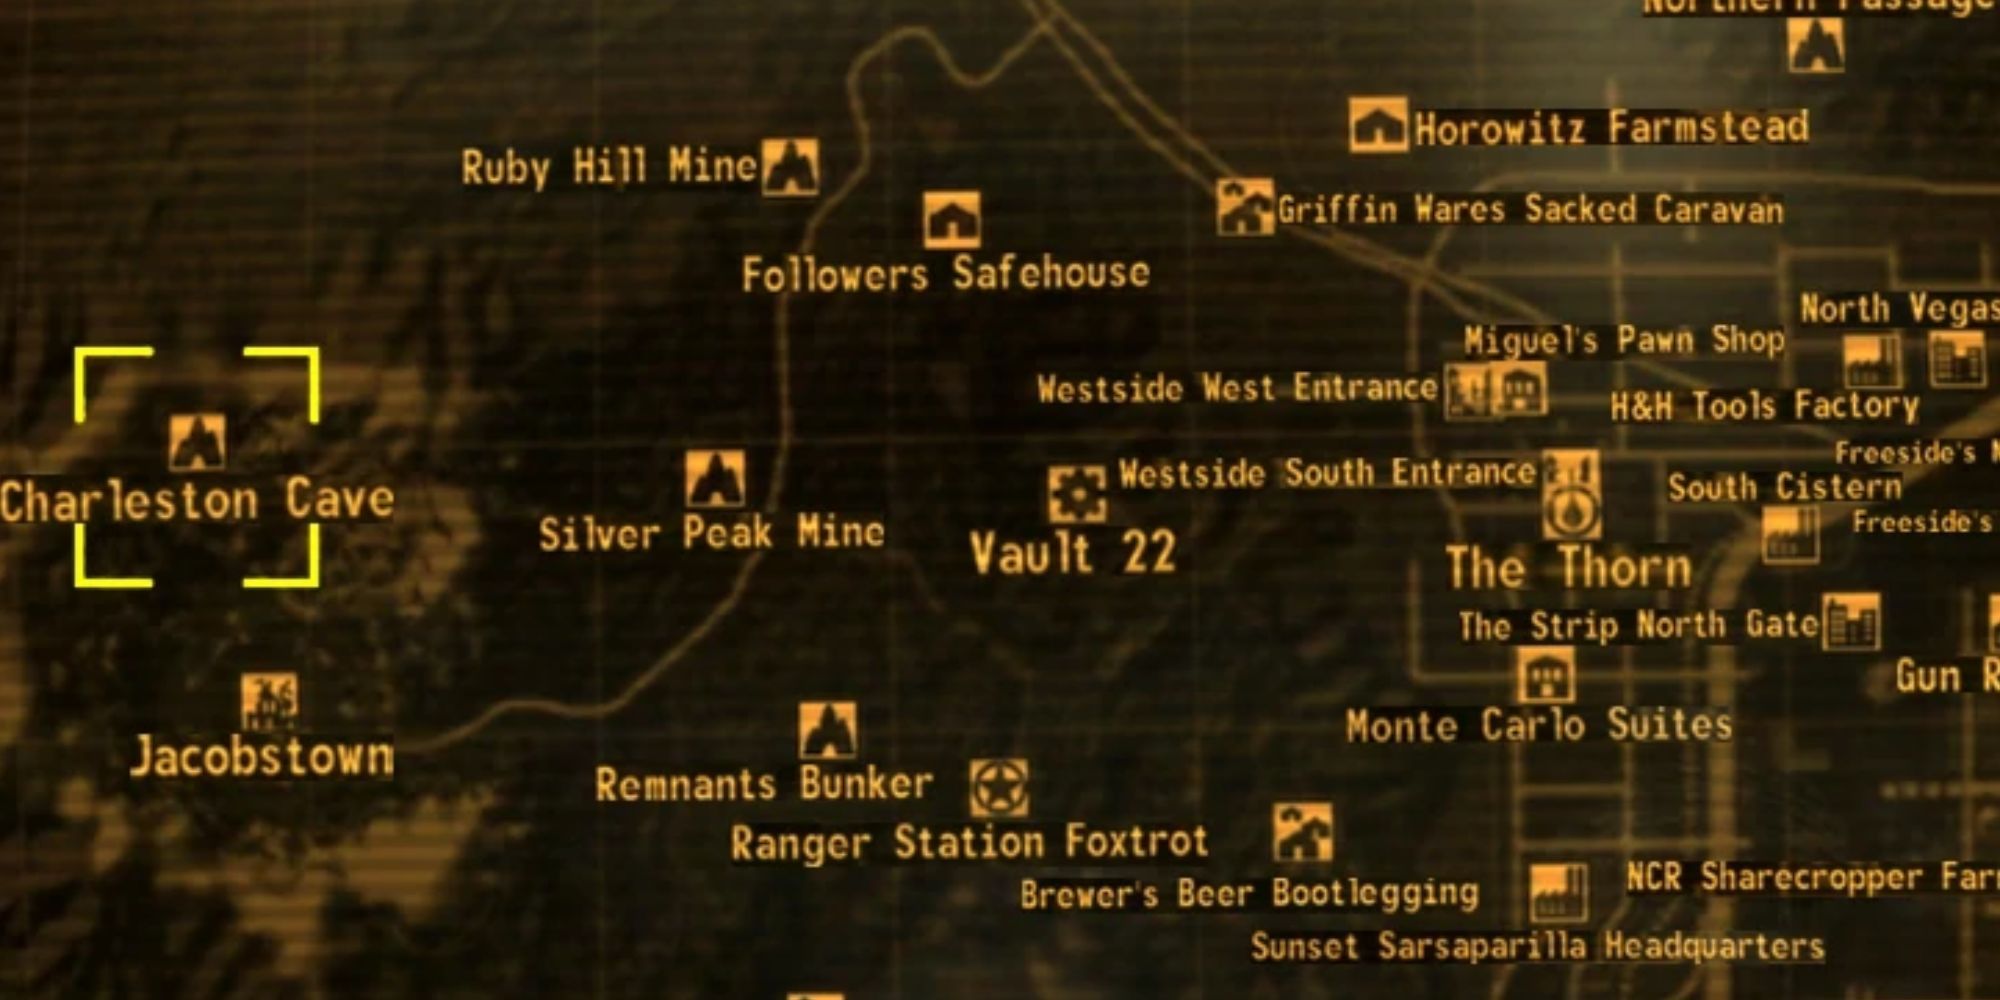 New Vegas Charleston Cave On The Map